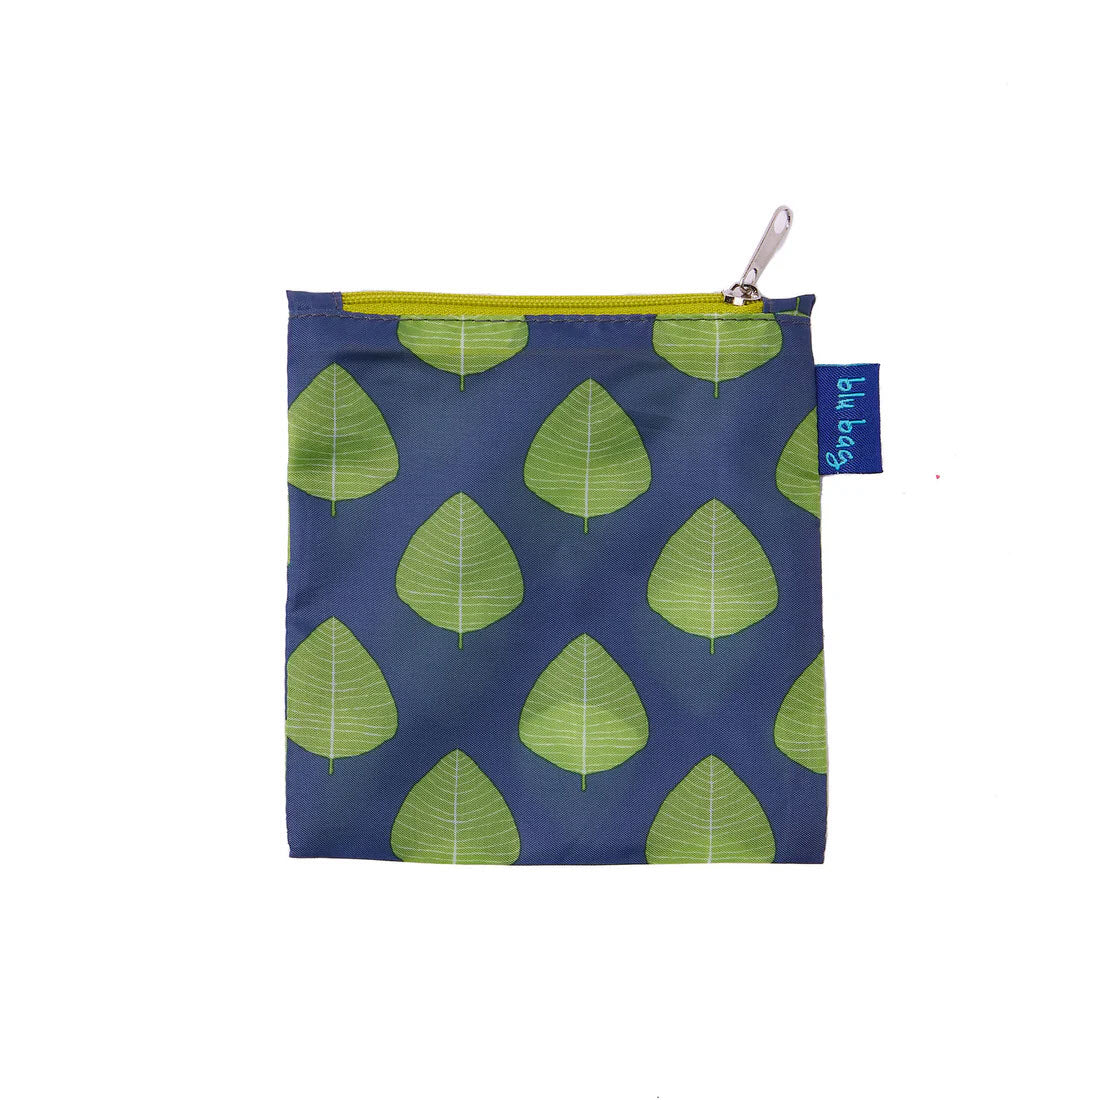 A zippered pouch with a blue background and green leaf pattern, featuring a yellow zipper and a blue label, designed as an eco-friendly tote, such as the BLU BAG ASPEN LEAVES by Rockflowerpaper.